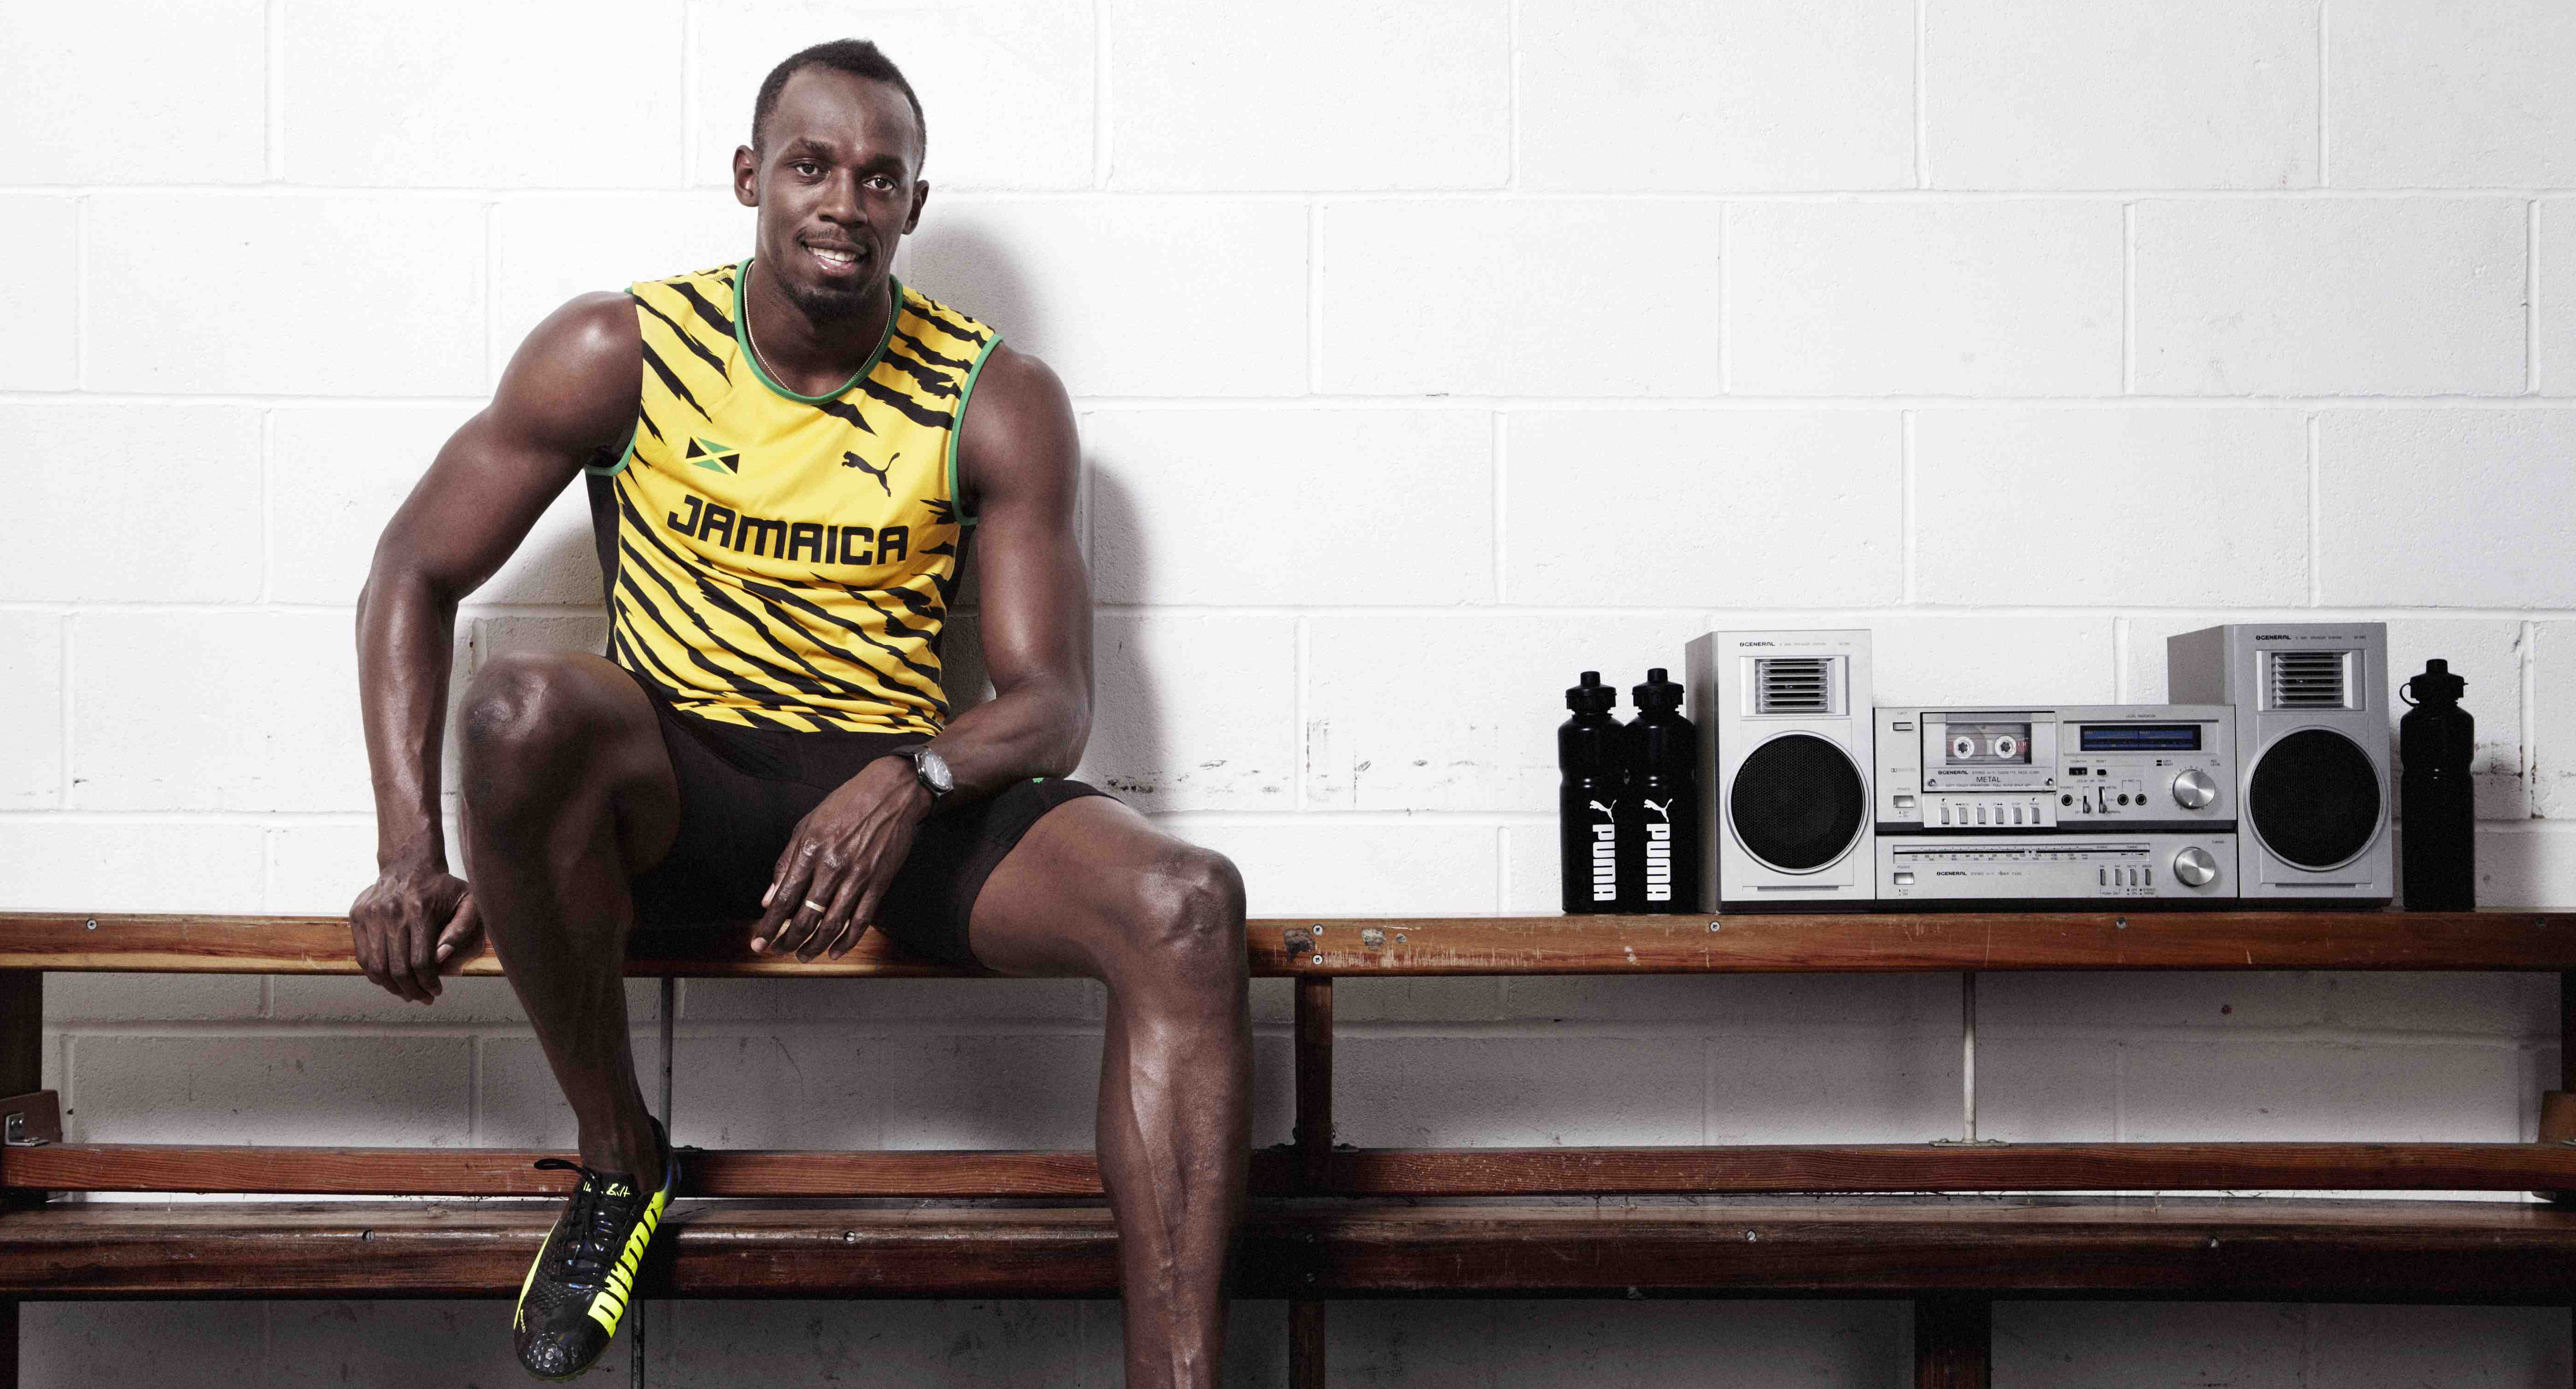 Usain Bolt turned musician released his first album, Country Yutes, on September third